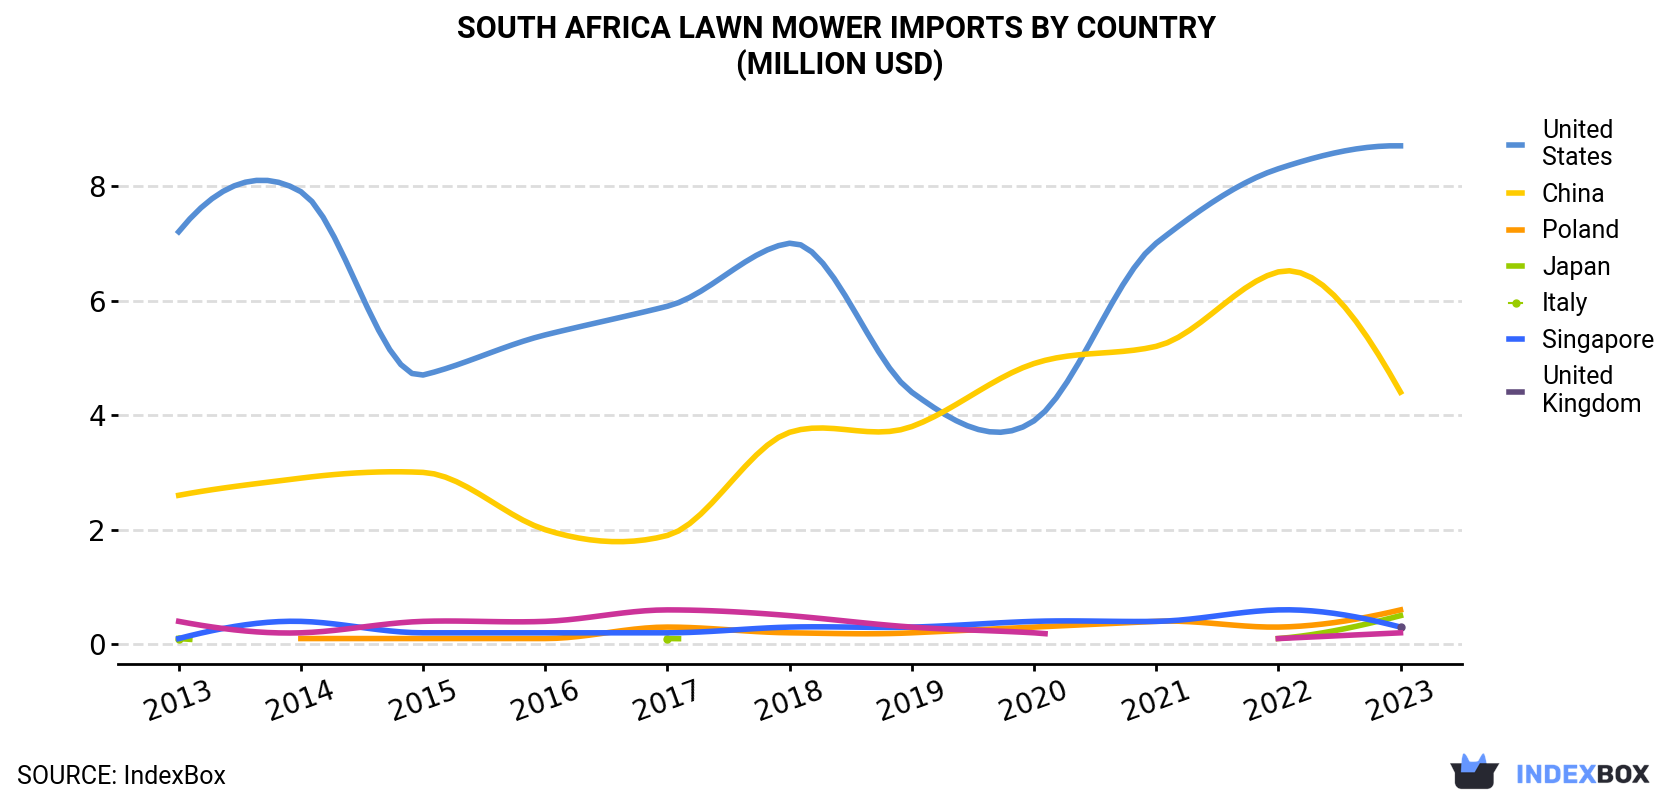 South Africa Lawn Mower Imports By Country (Million USD)